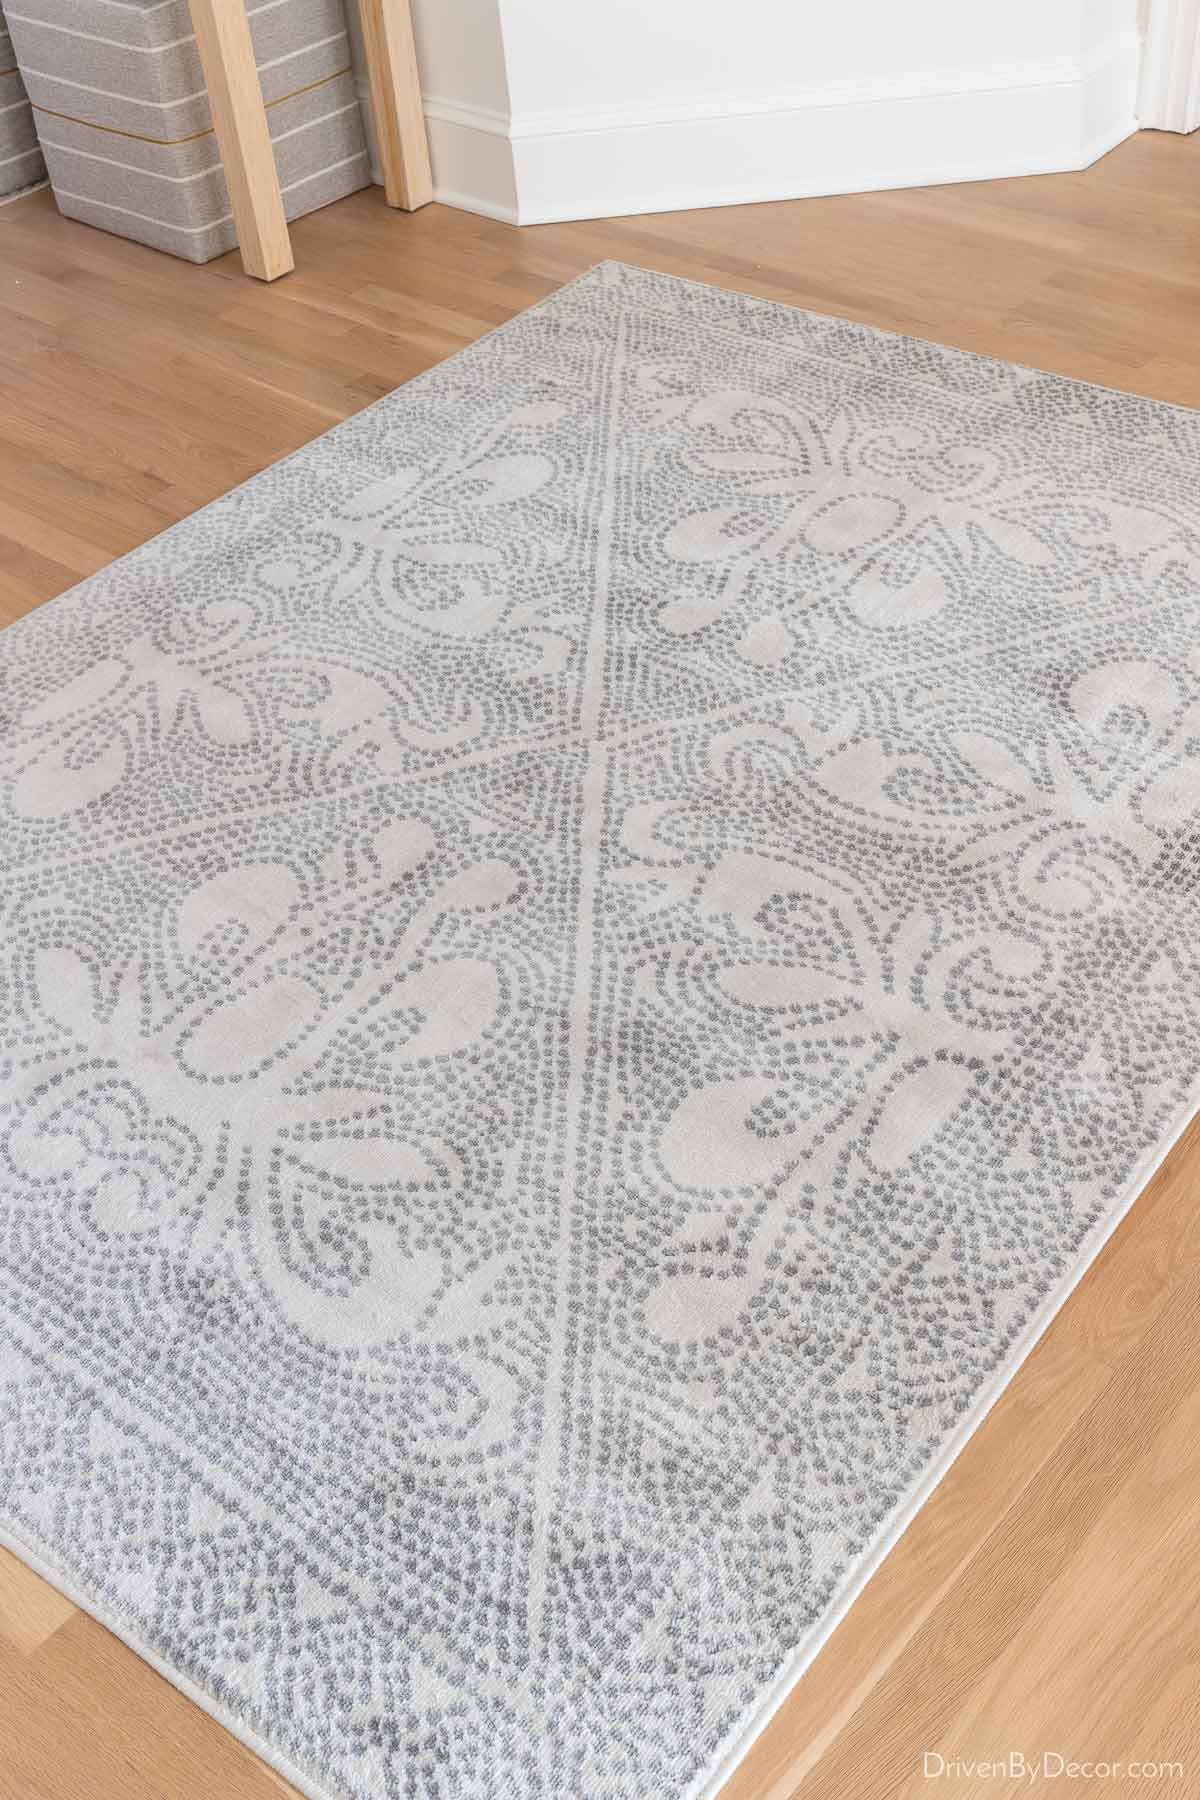 Lookalike to Serena & Lily's Mirabelle Rug